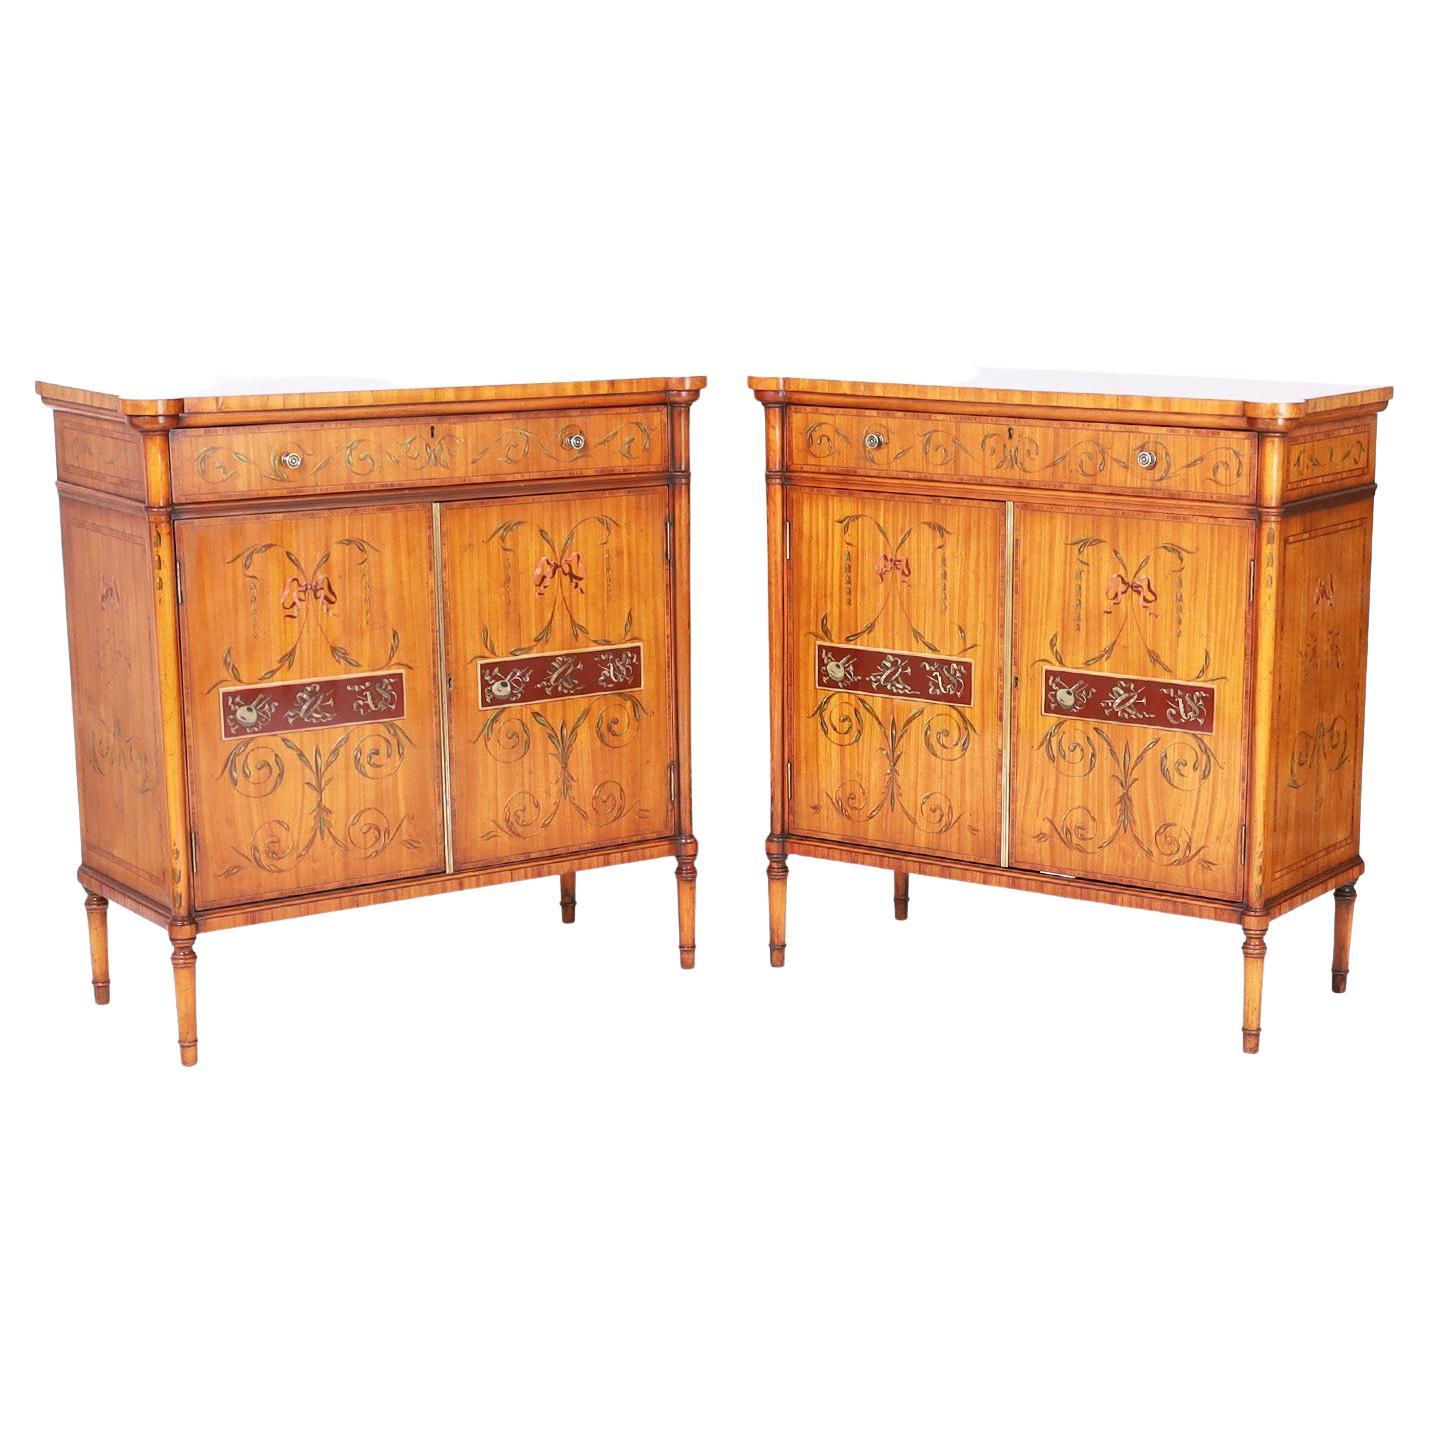 Pair of Antique English Adams Style Cabinets